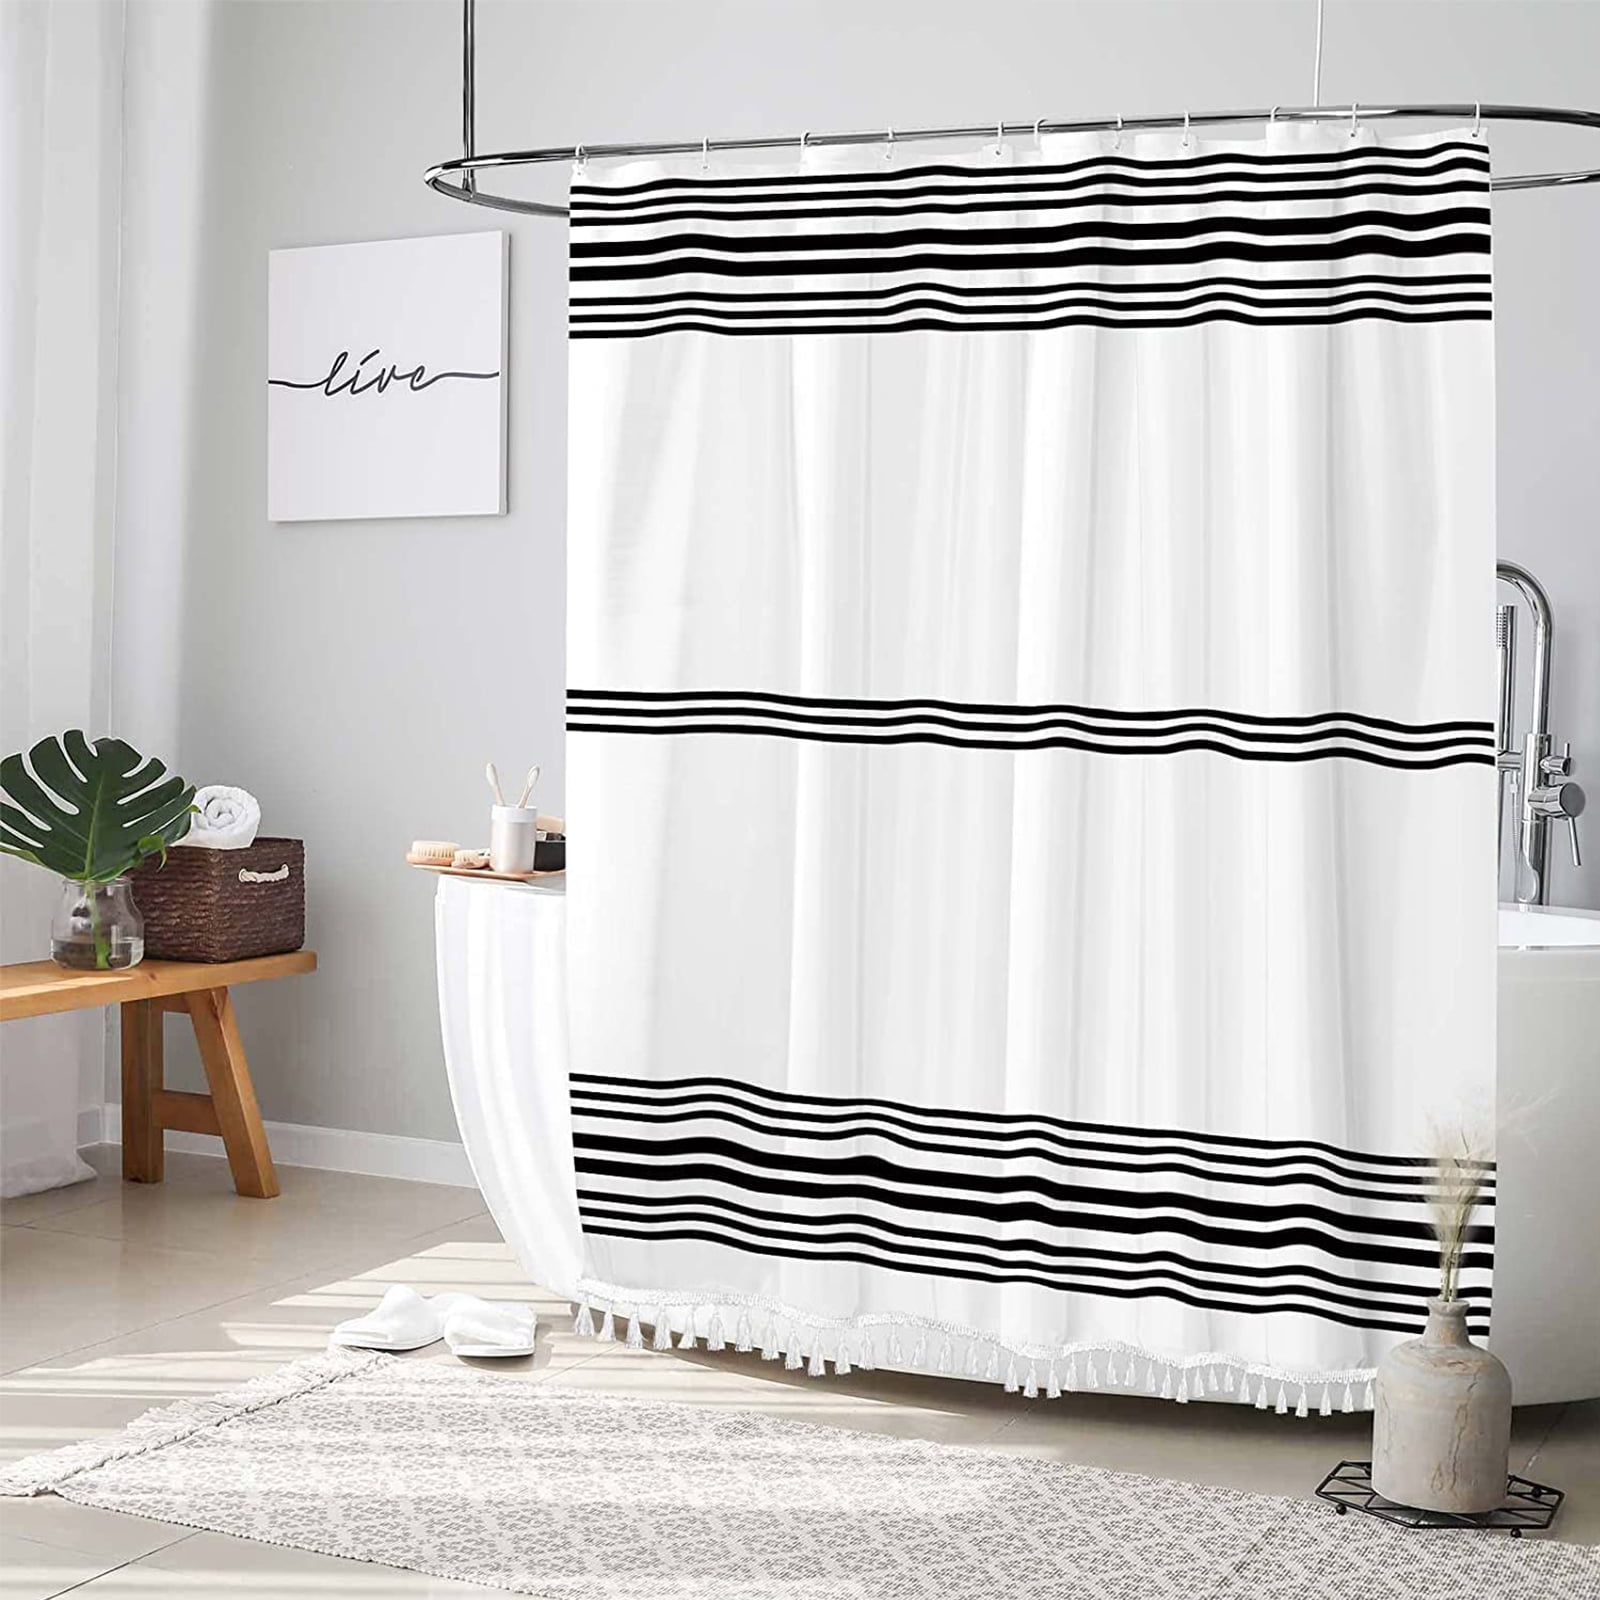 Shower Curtain Striped with Tassel Modern Bathroom Curtains, Fabric Black  and White, Waterproof 72x72 inch 